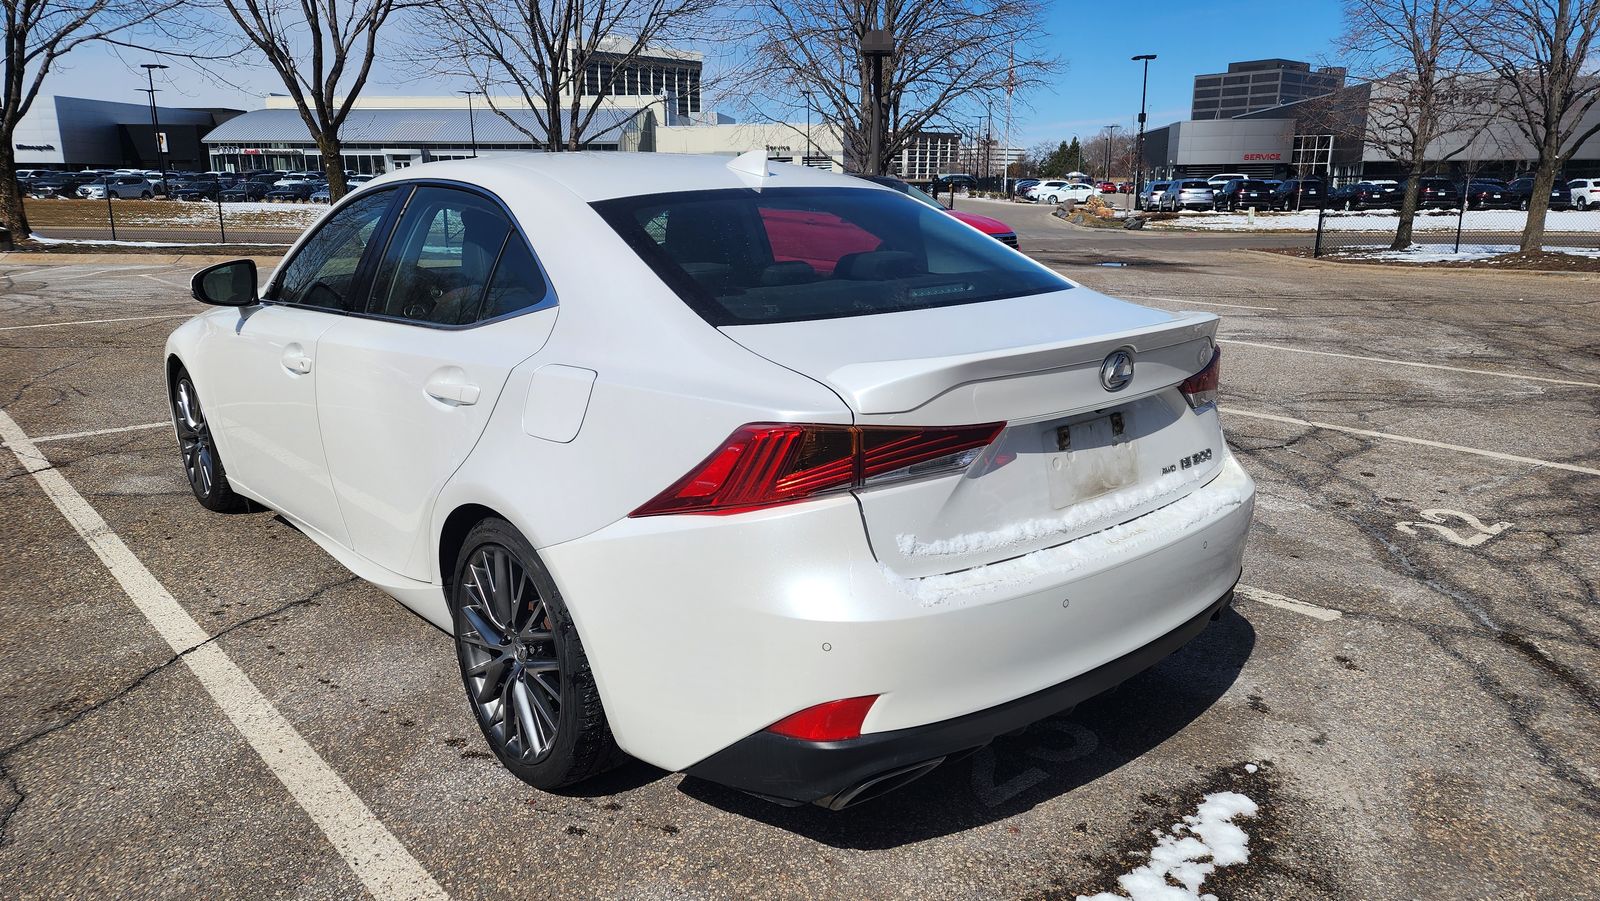 Used 2019 Lexus IS 300 with VIN JTHC81D2XK5036175 for sale in Minneapolis, Minnesota